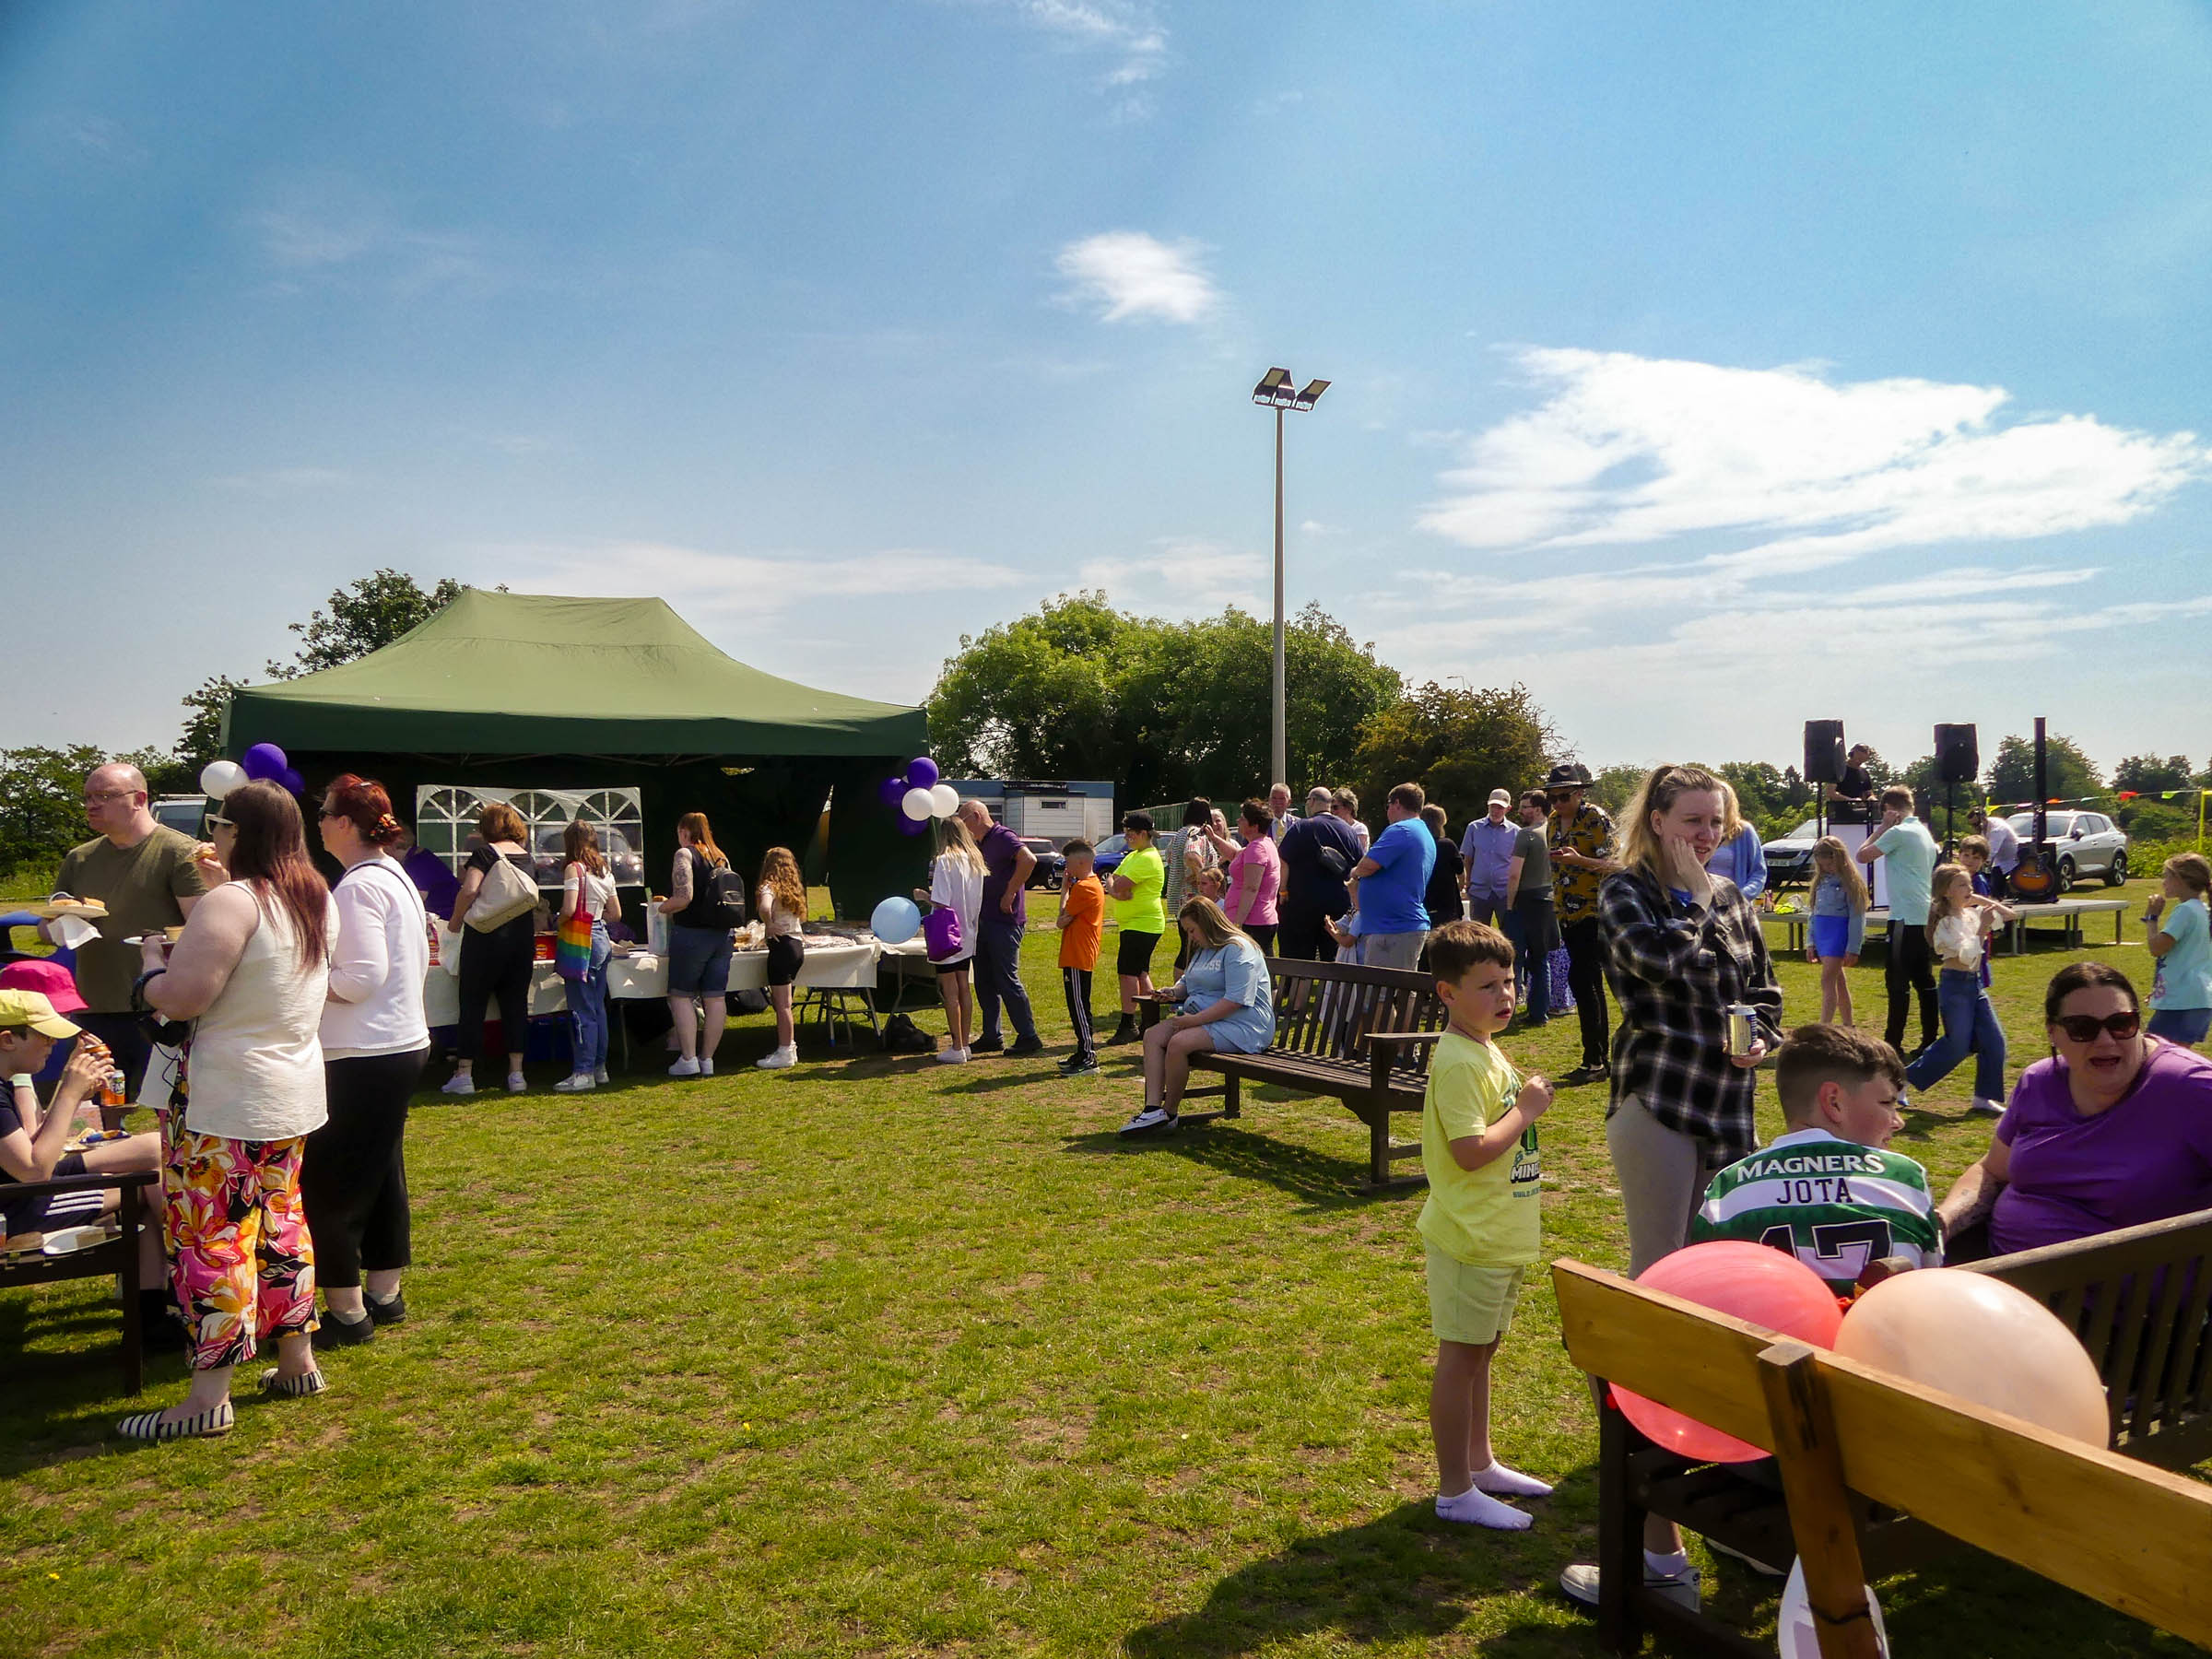 Crowds of people attending an open air event on a sunny day, with a tent serving food.